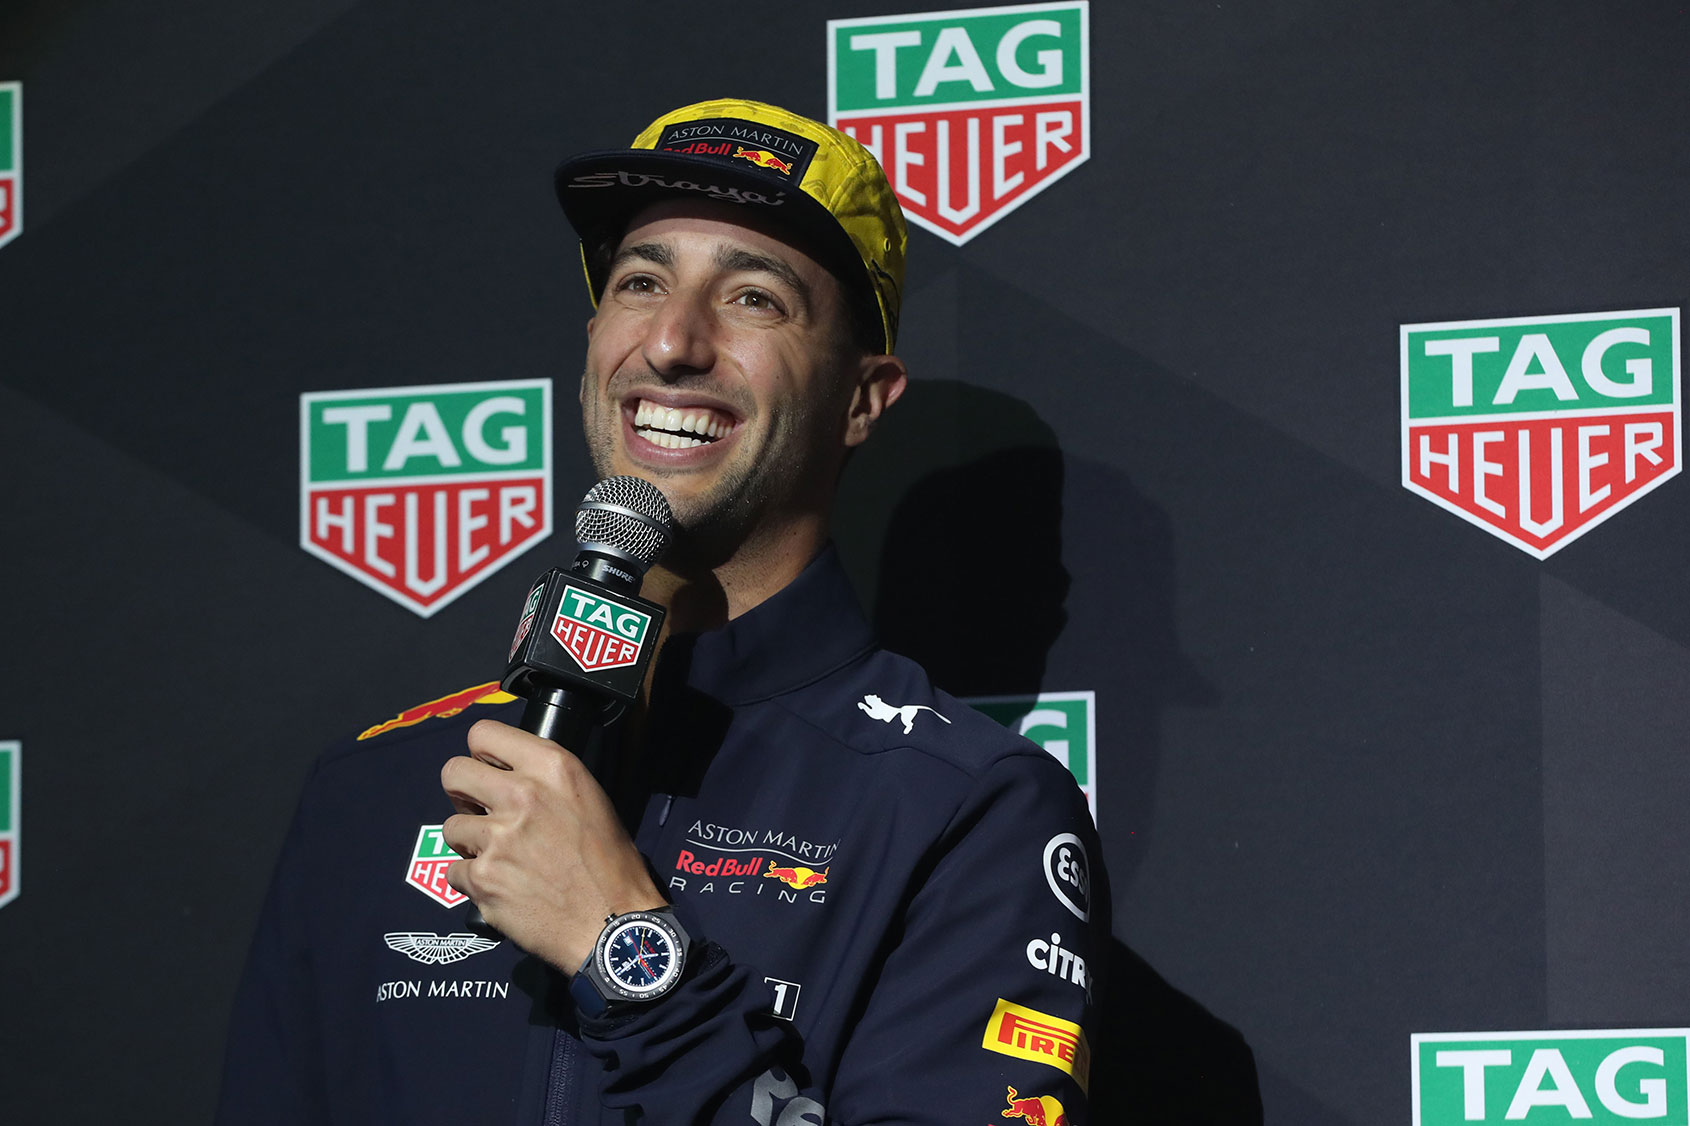 INTERVIEW: We talk to Red Bull Racing's Daniel Ricciardo at the launch ...